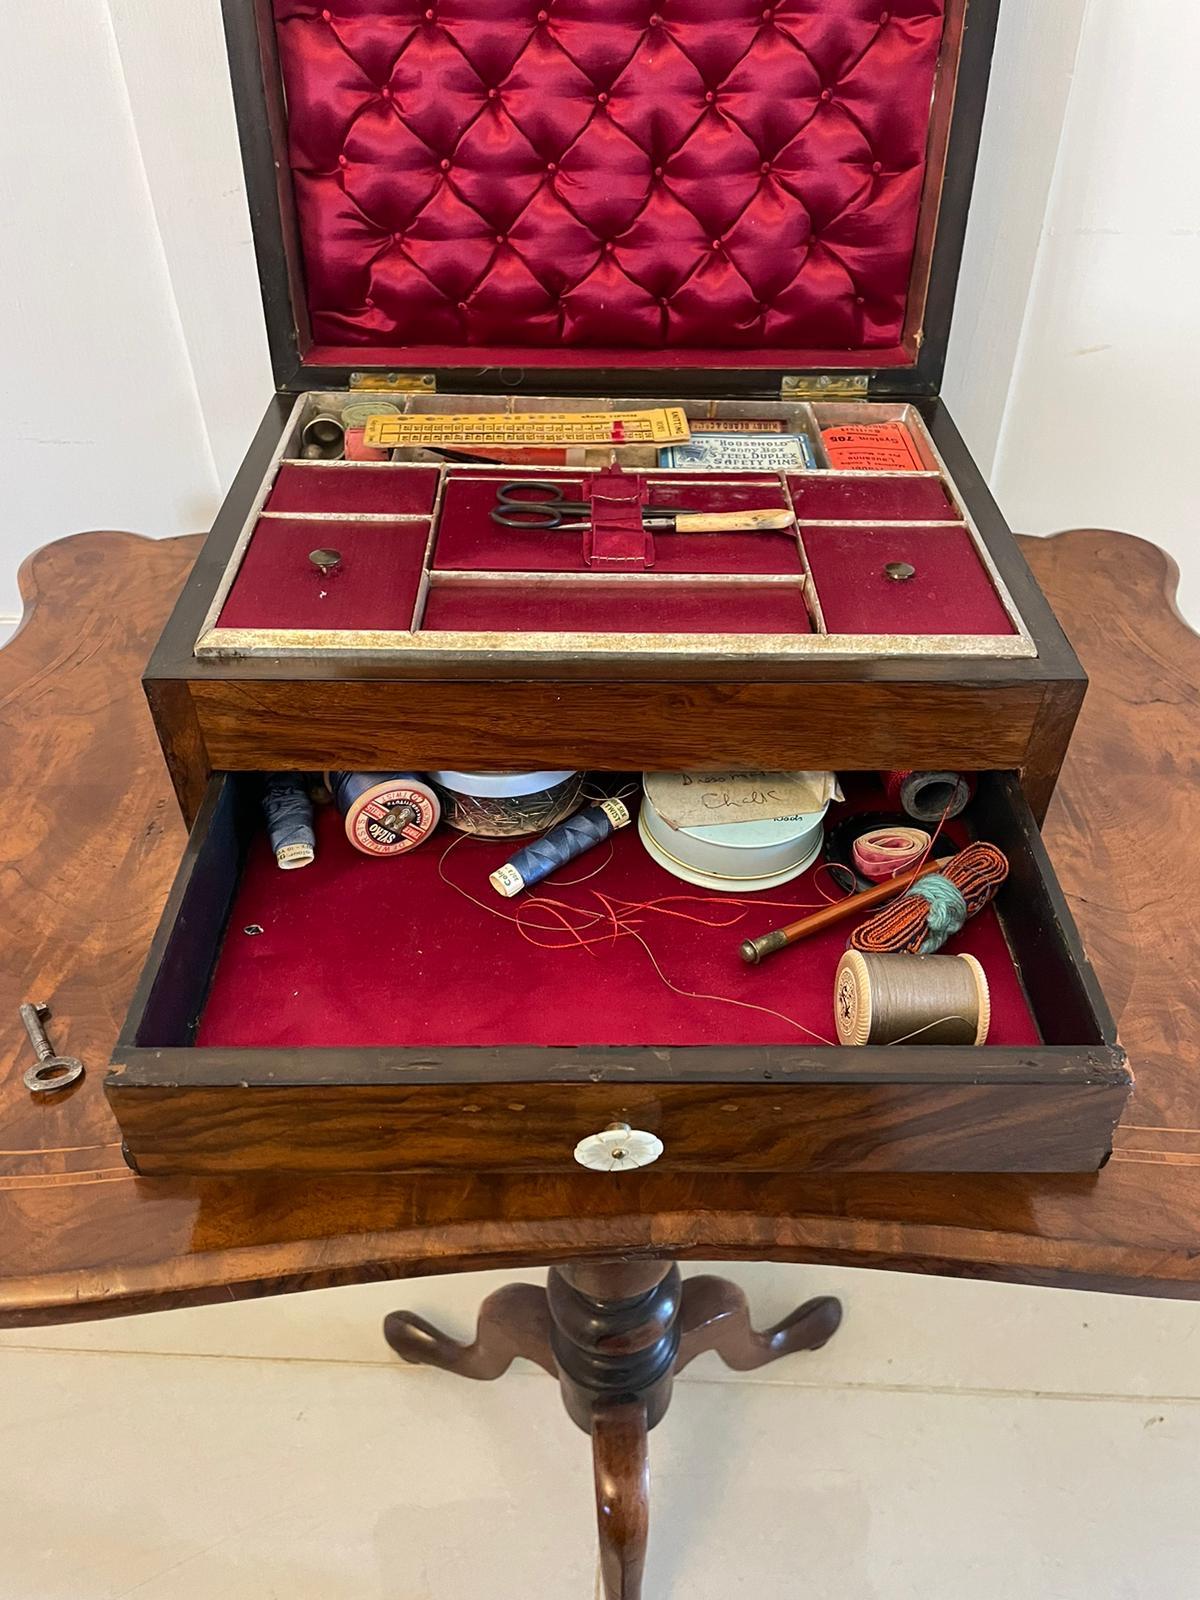 Antique Victorian quality figured walnut sewing box having a brass handle to the lift up top opening to reveal a fitted interior, drop down front opening to reveal a storage drawer 

A charming example with a fabulous colour

Dimensions:
Height 16